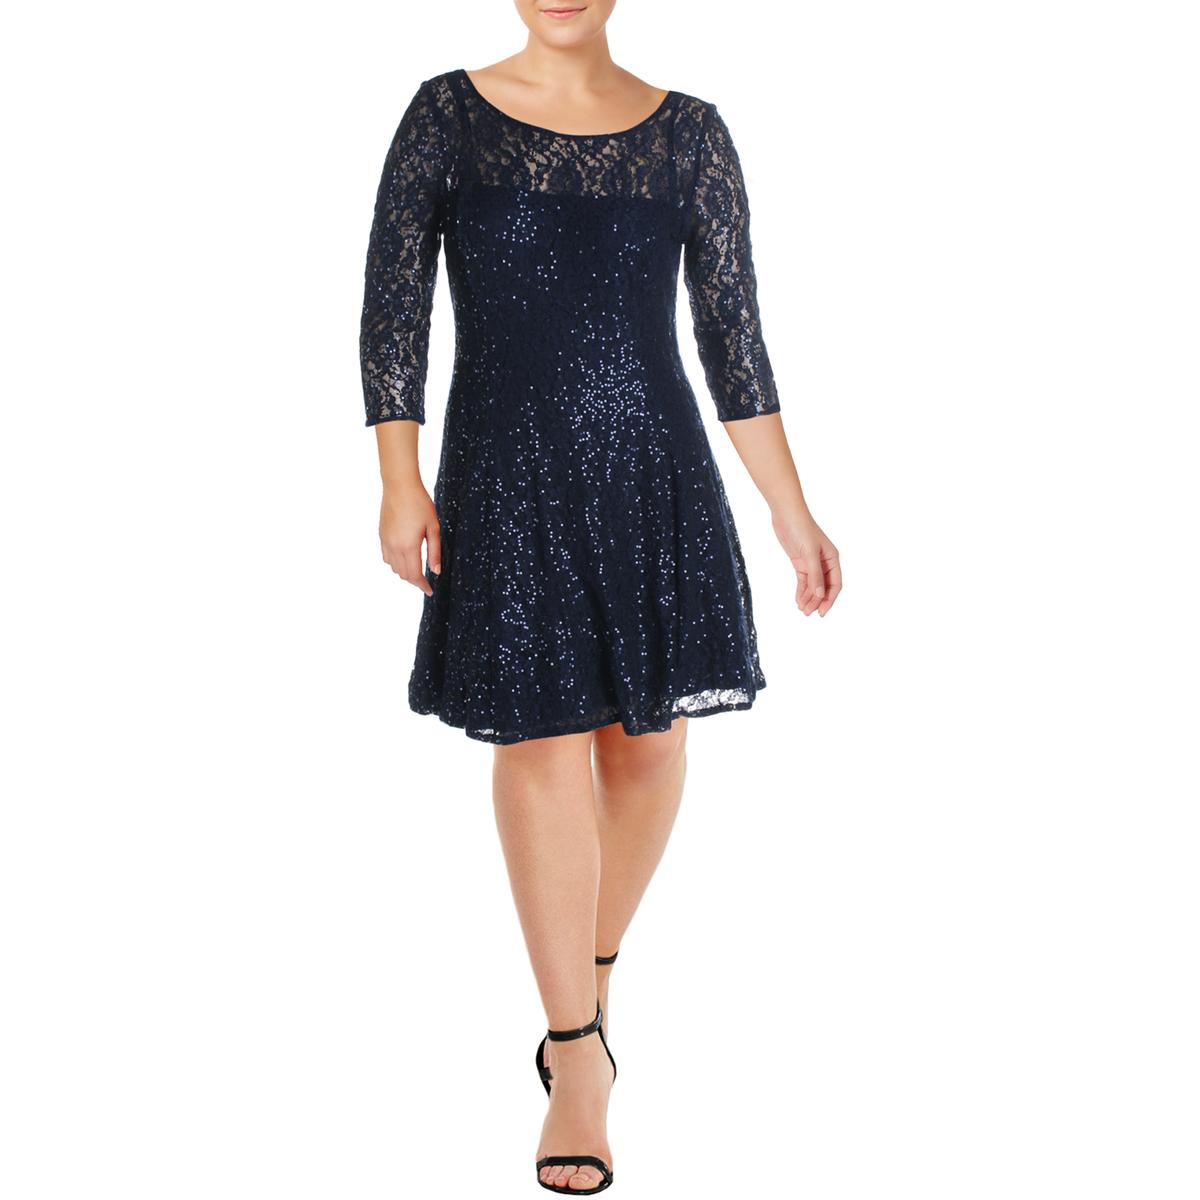 SL Fashions Womens Navy Lace Overlay Sequined Cocktail Dress BHFO 5075 ...